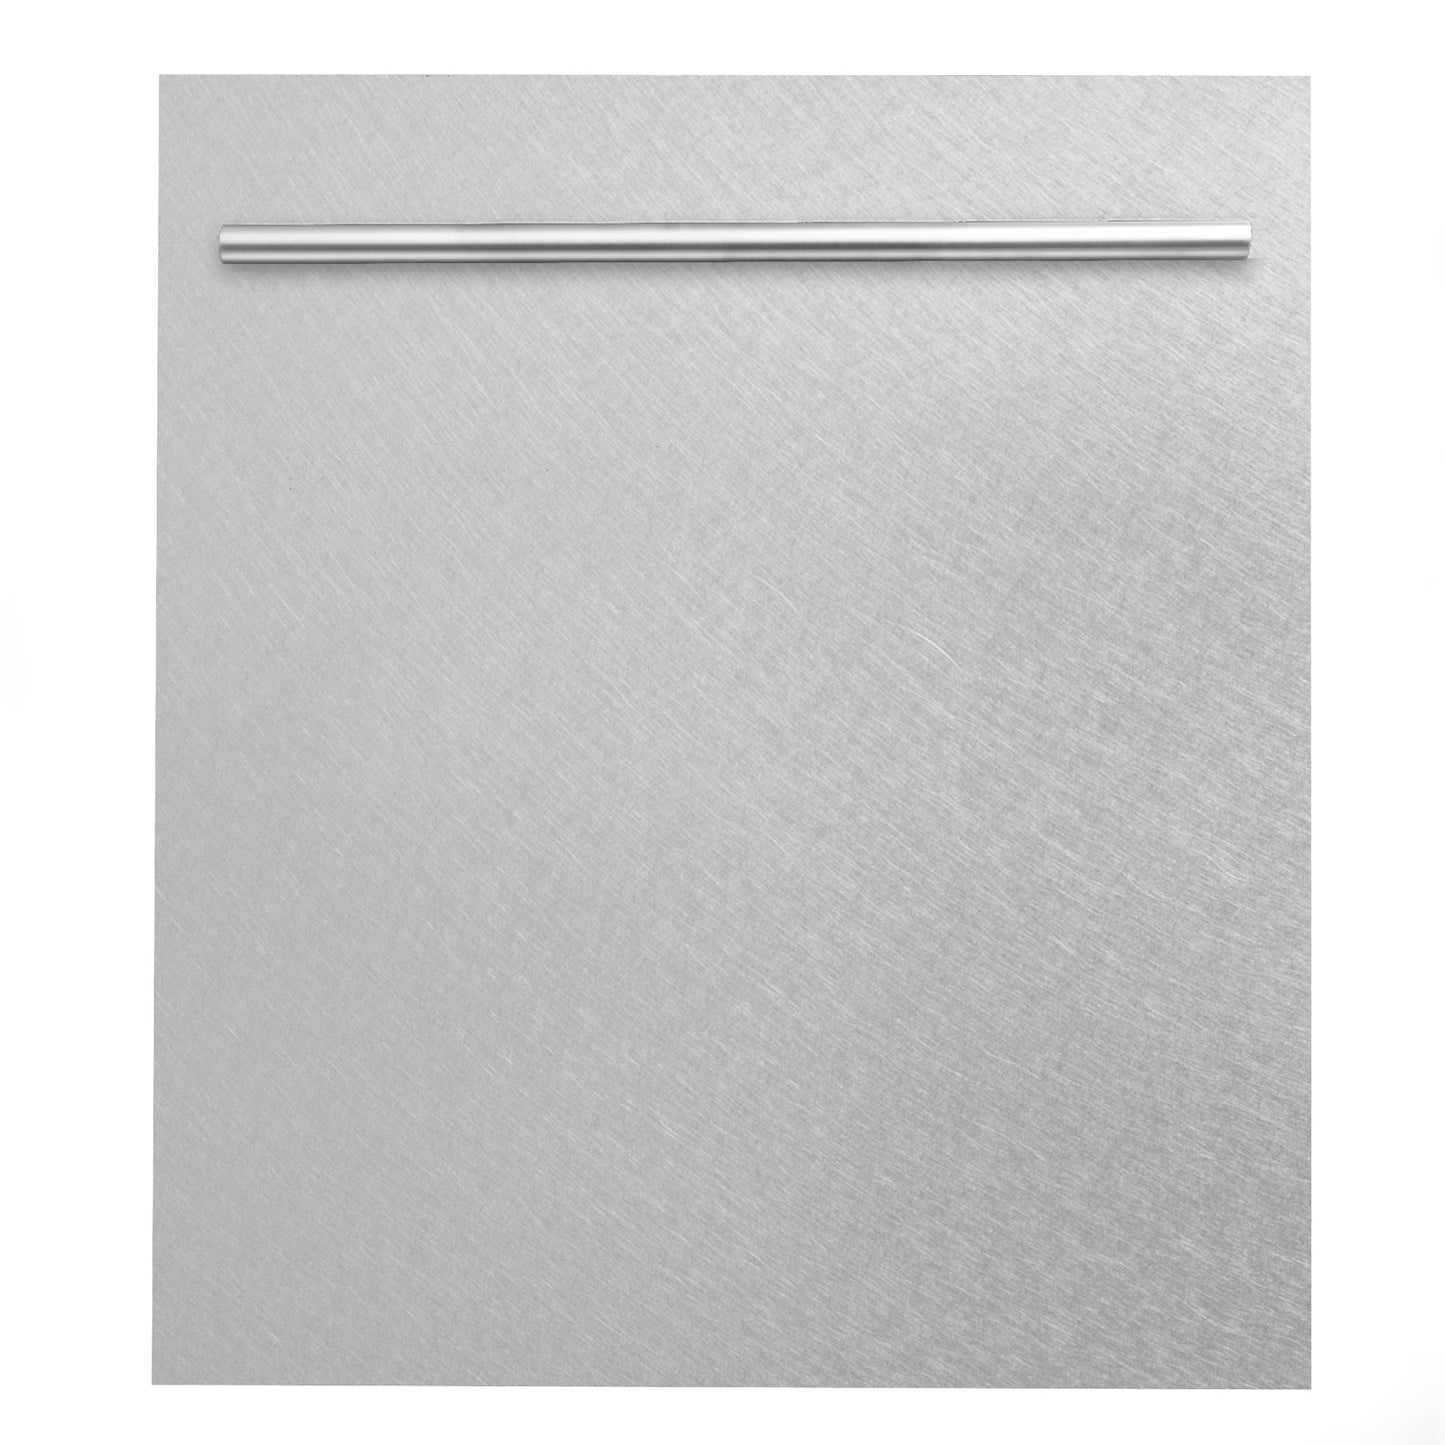 ZLINE 24 in. Top Control Dishwasher in Fingerprint Resistant Stainless Steel and Modern Style Handle, 52dBa (DW-SN-24)